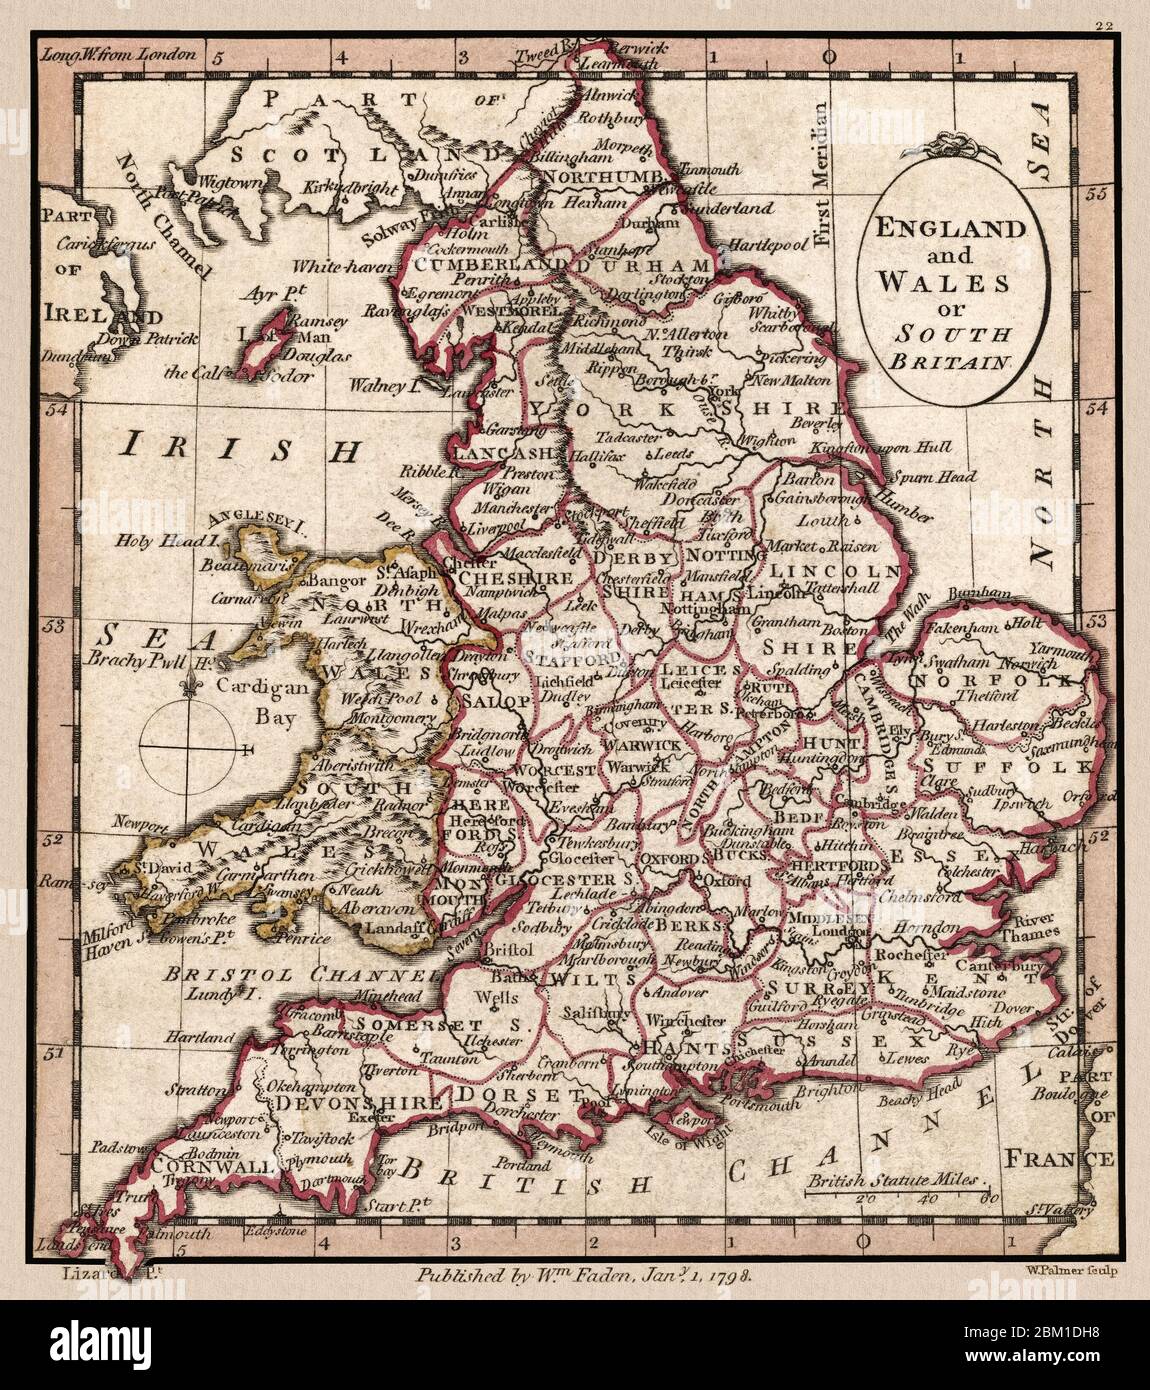 'England and Wales or South Britain.' Map shows geographic divisions circa 1798. This is a beautifully detailed historic map reproduction. Original from a British atlas published by famed cartographer William Faden. Stock Photo